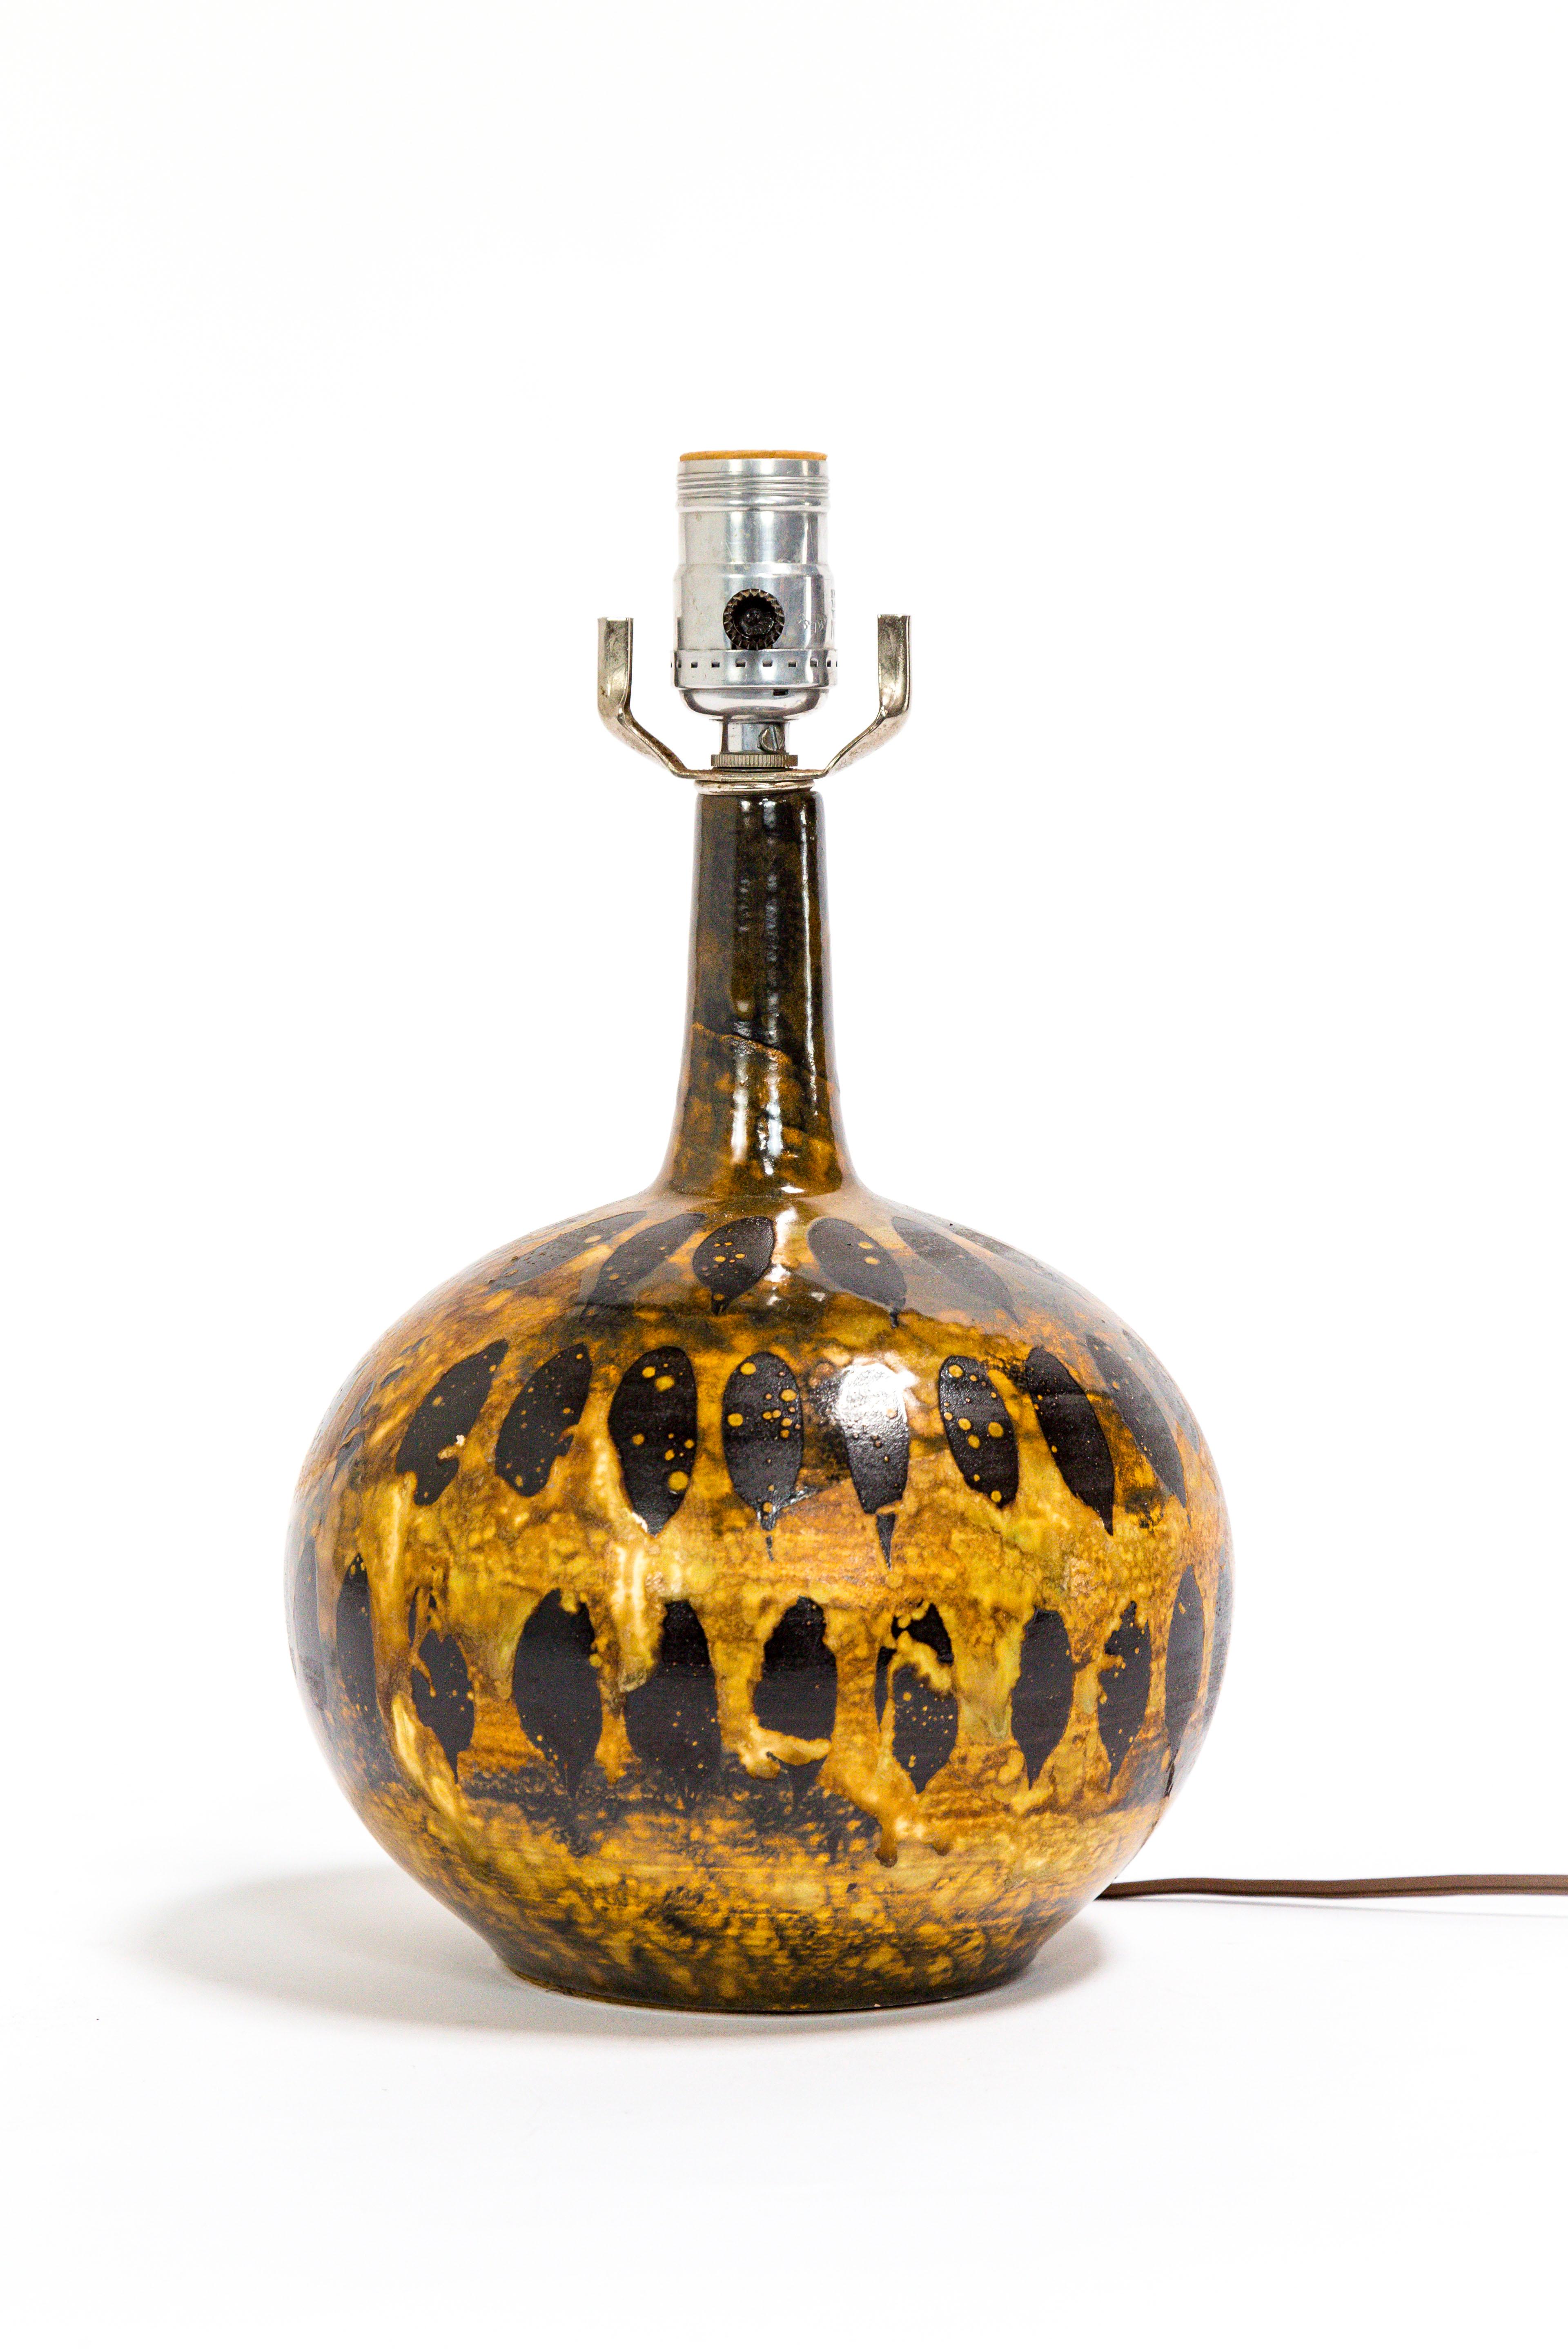 This petite gourd lamp has an incredible, variegated, spotted glaze. A bold, yet versatile piece; great for a side table, desk, or nightstand. Circa 1970's. 12.5